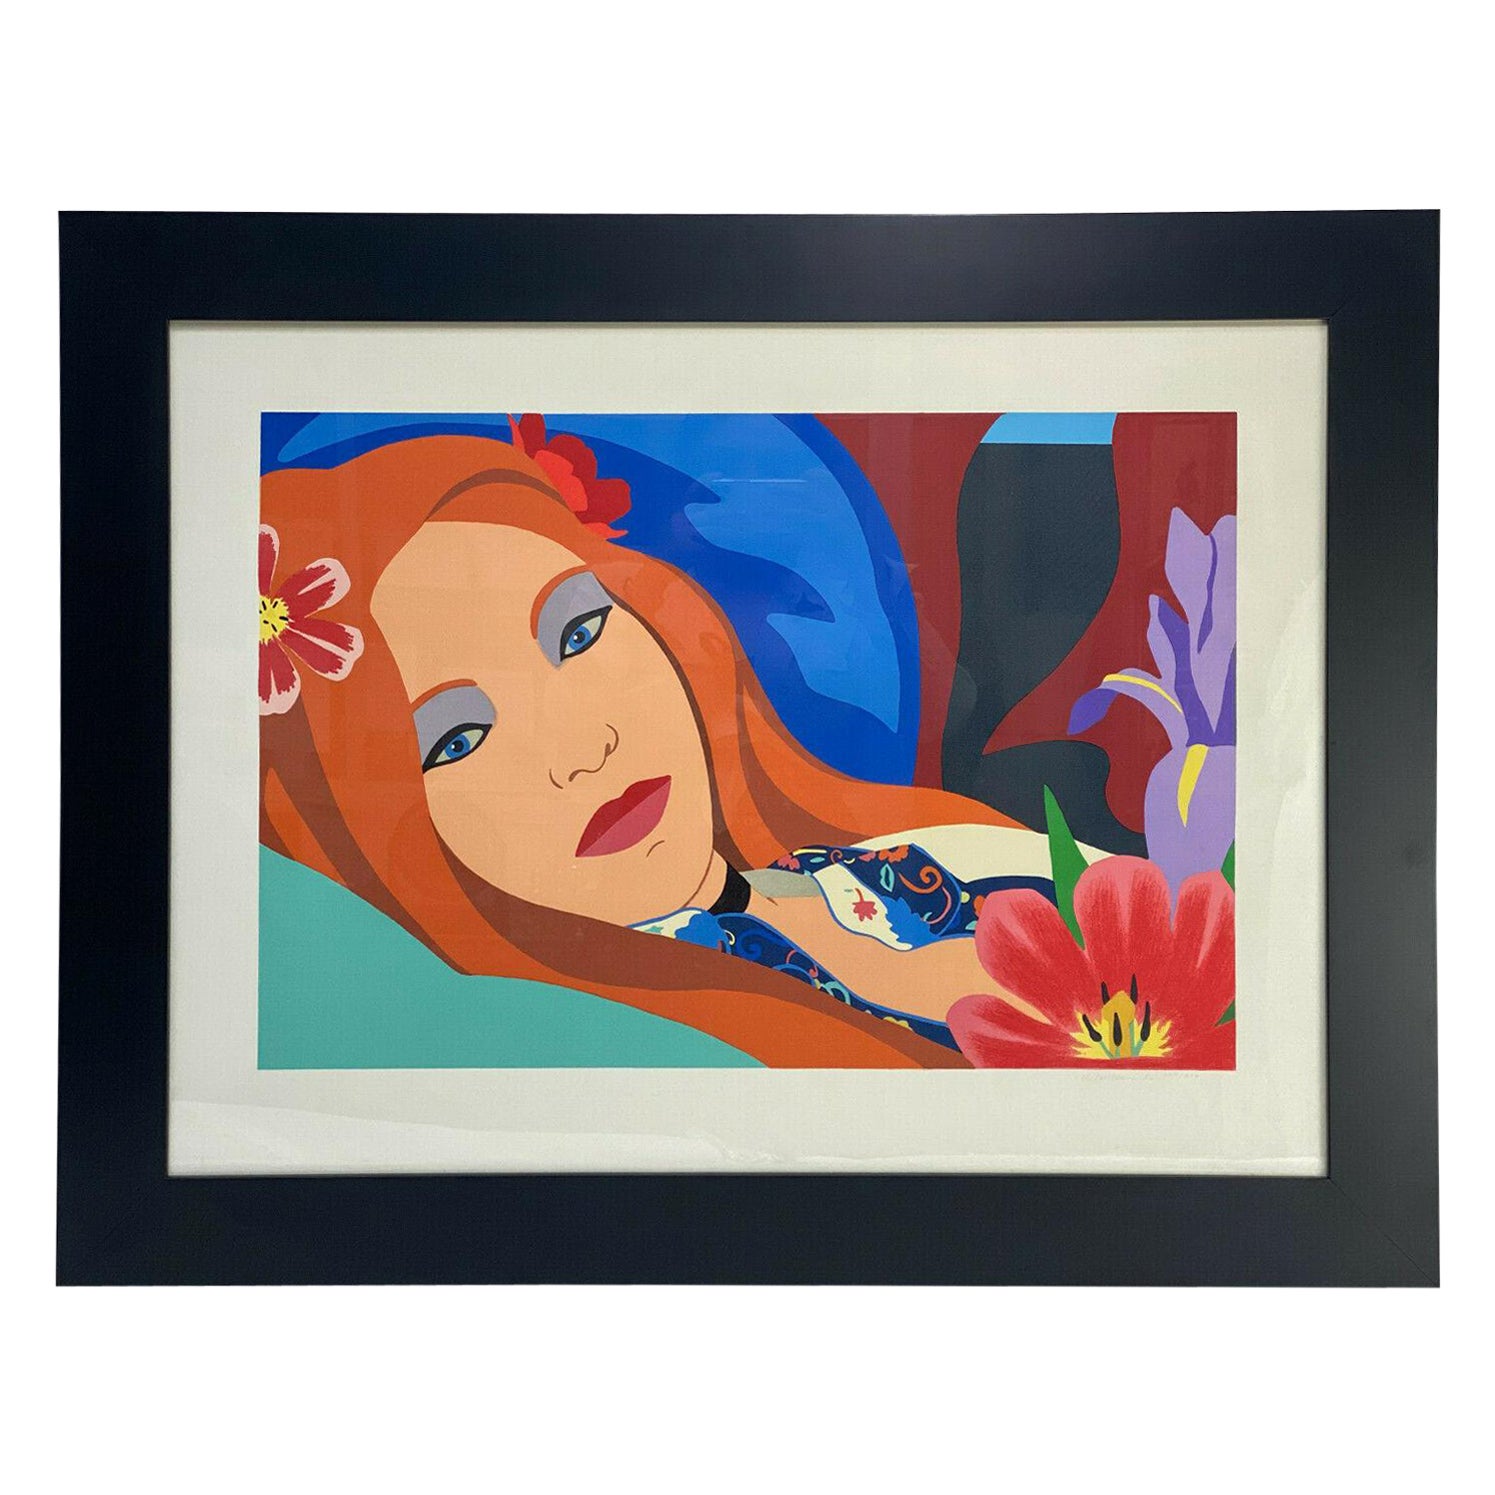 Colored lithograph by Tom Wesselmann, Titled "Lulu" For Sale